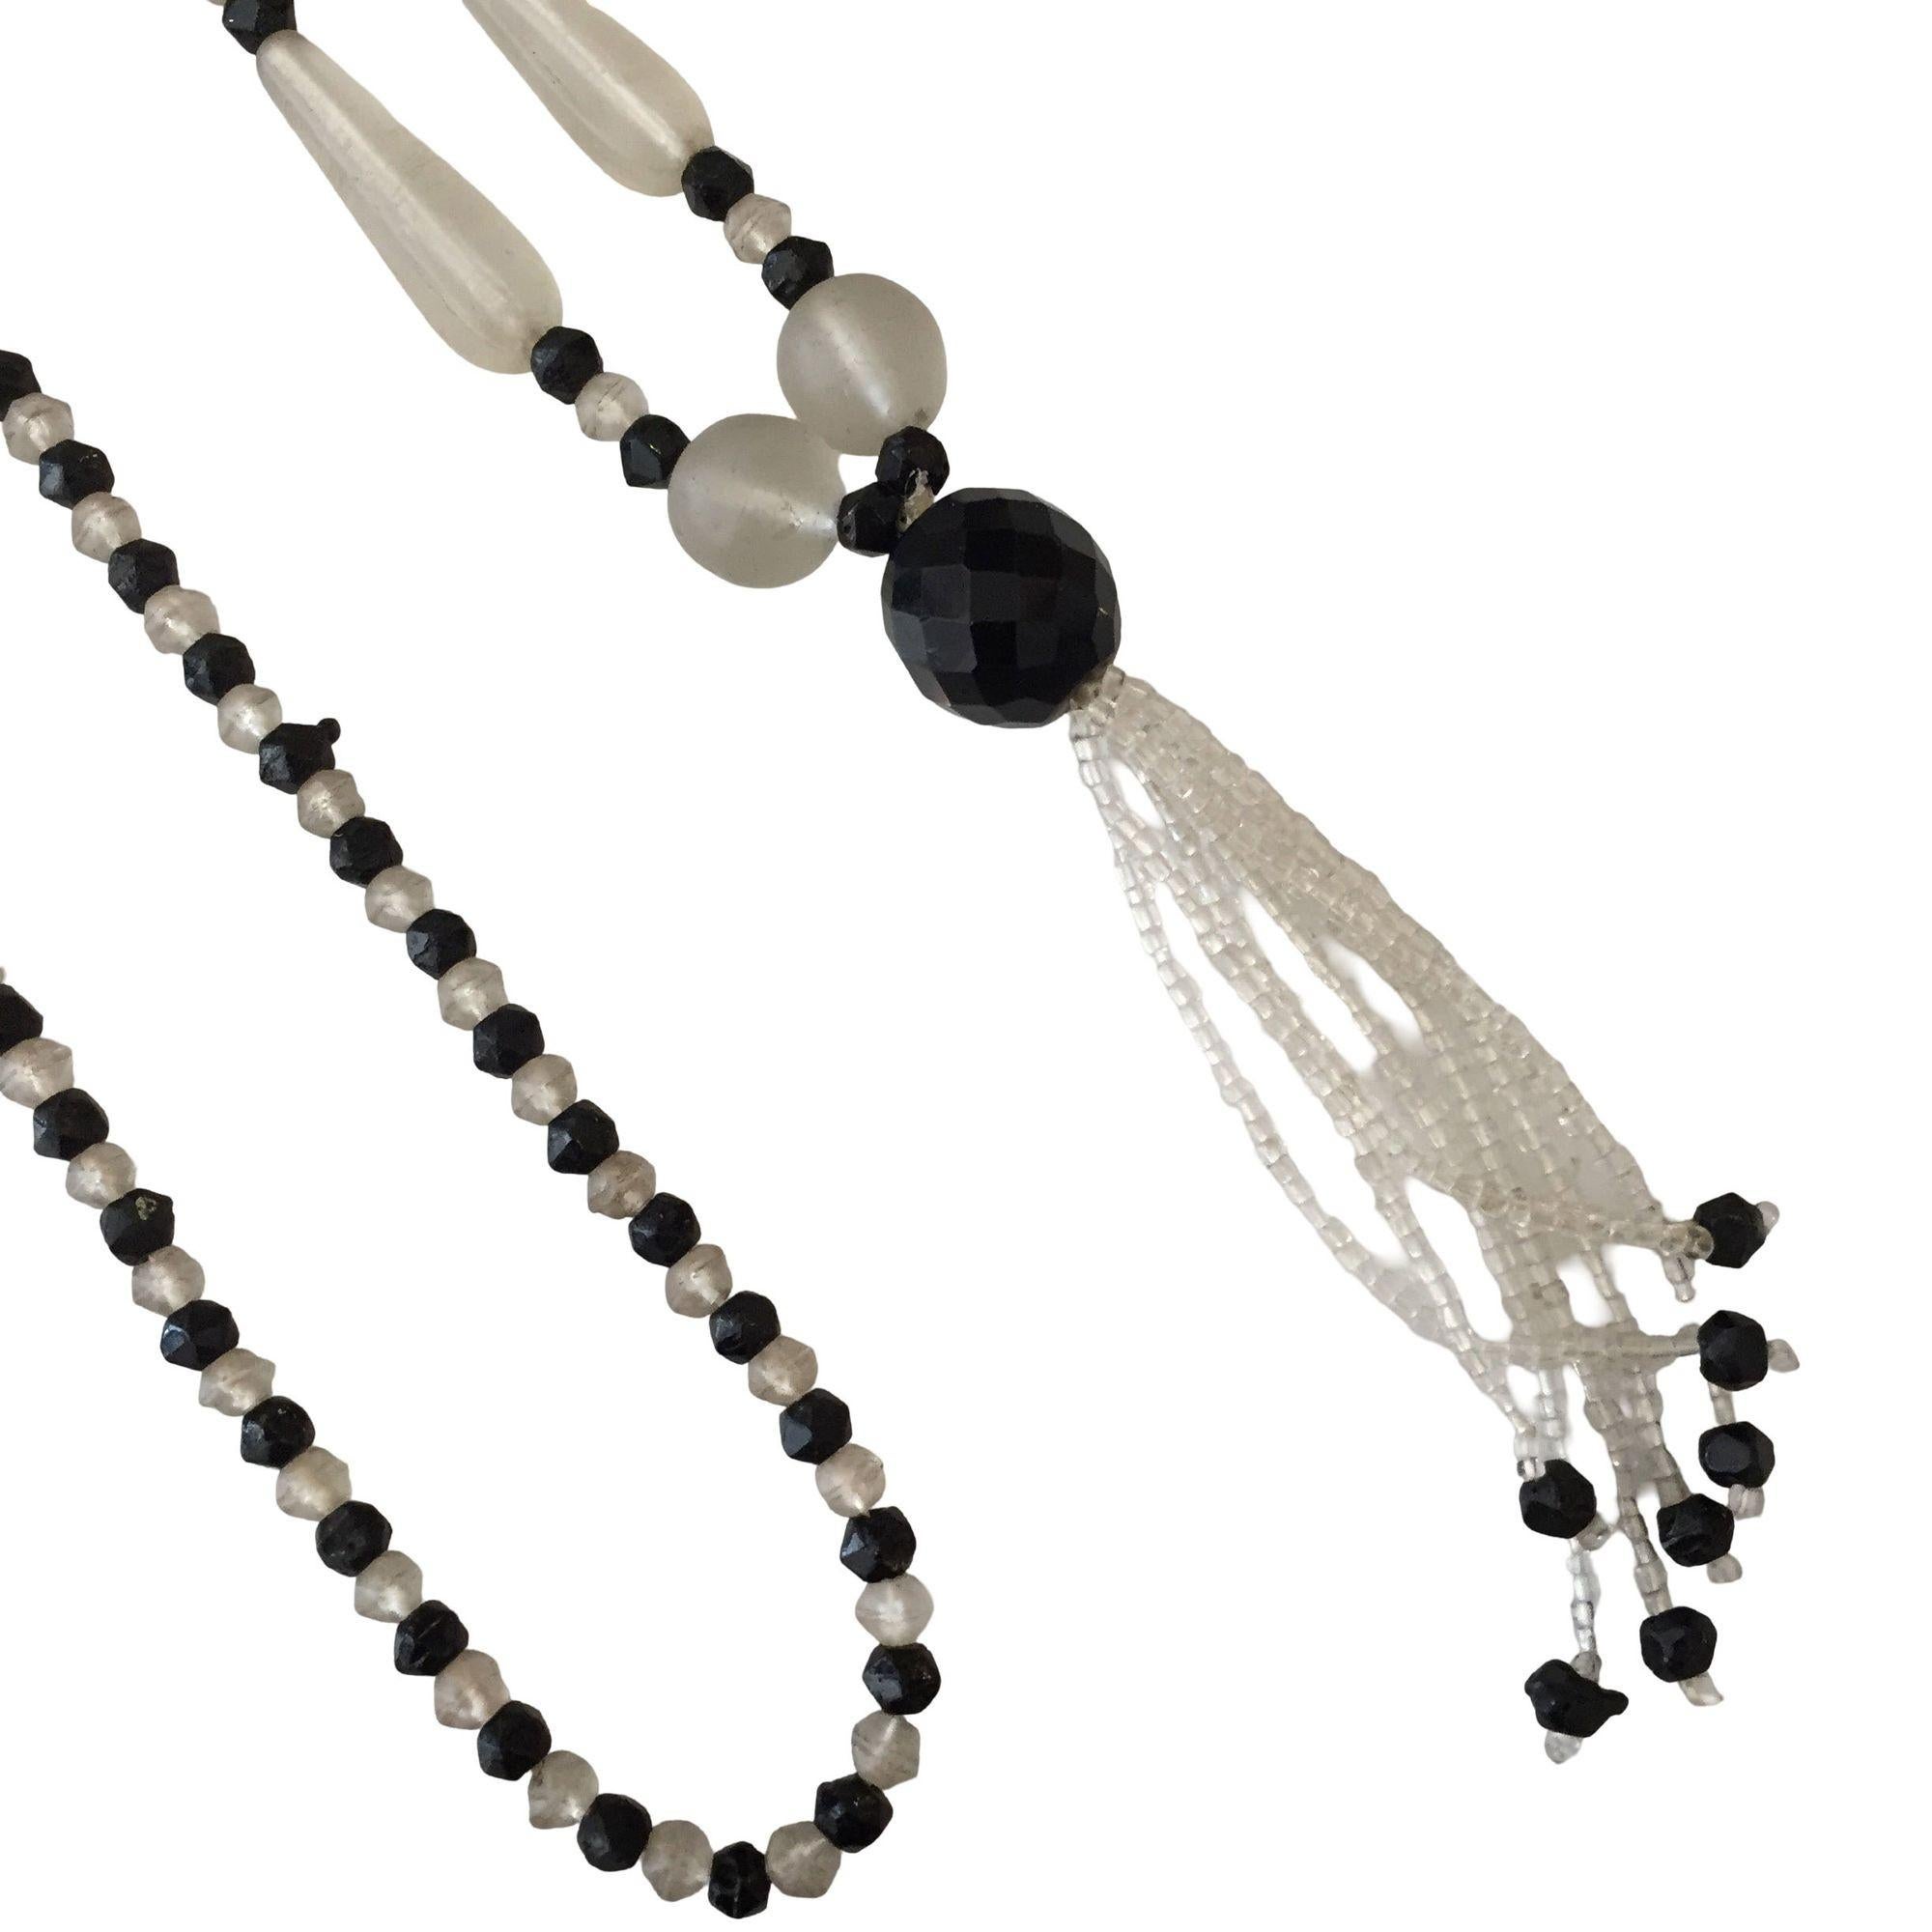 Victorian beaded lariat necklace made with black jet faceted beads with unique clear frosted glass beads.

Measures: 18